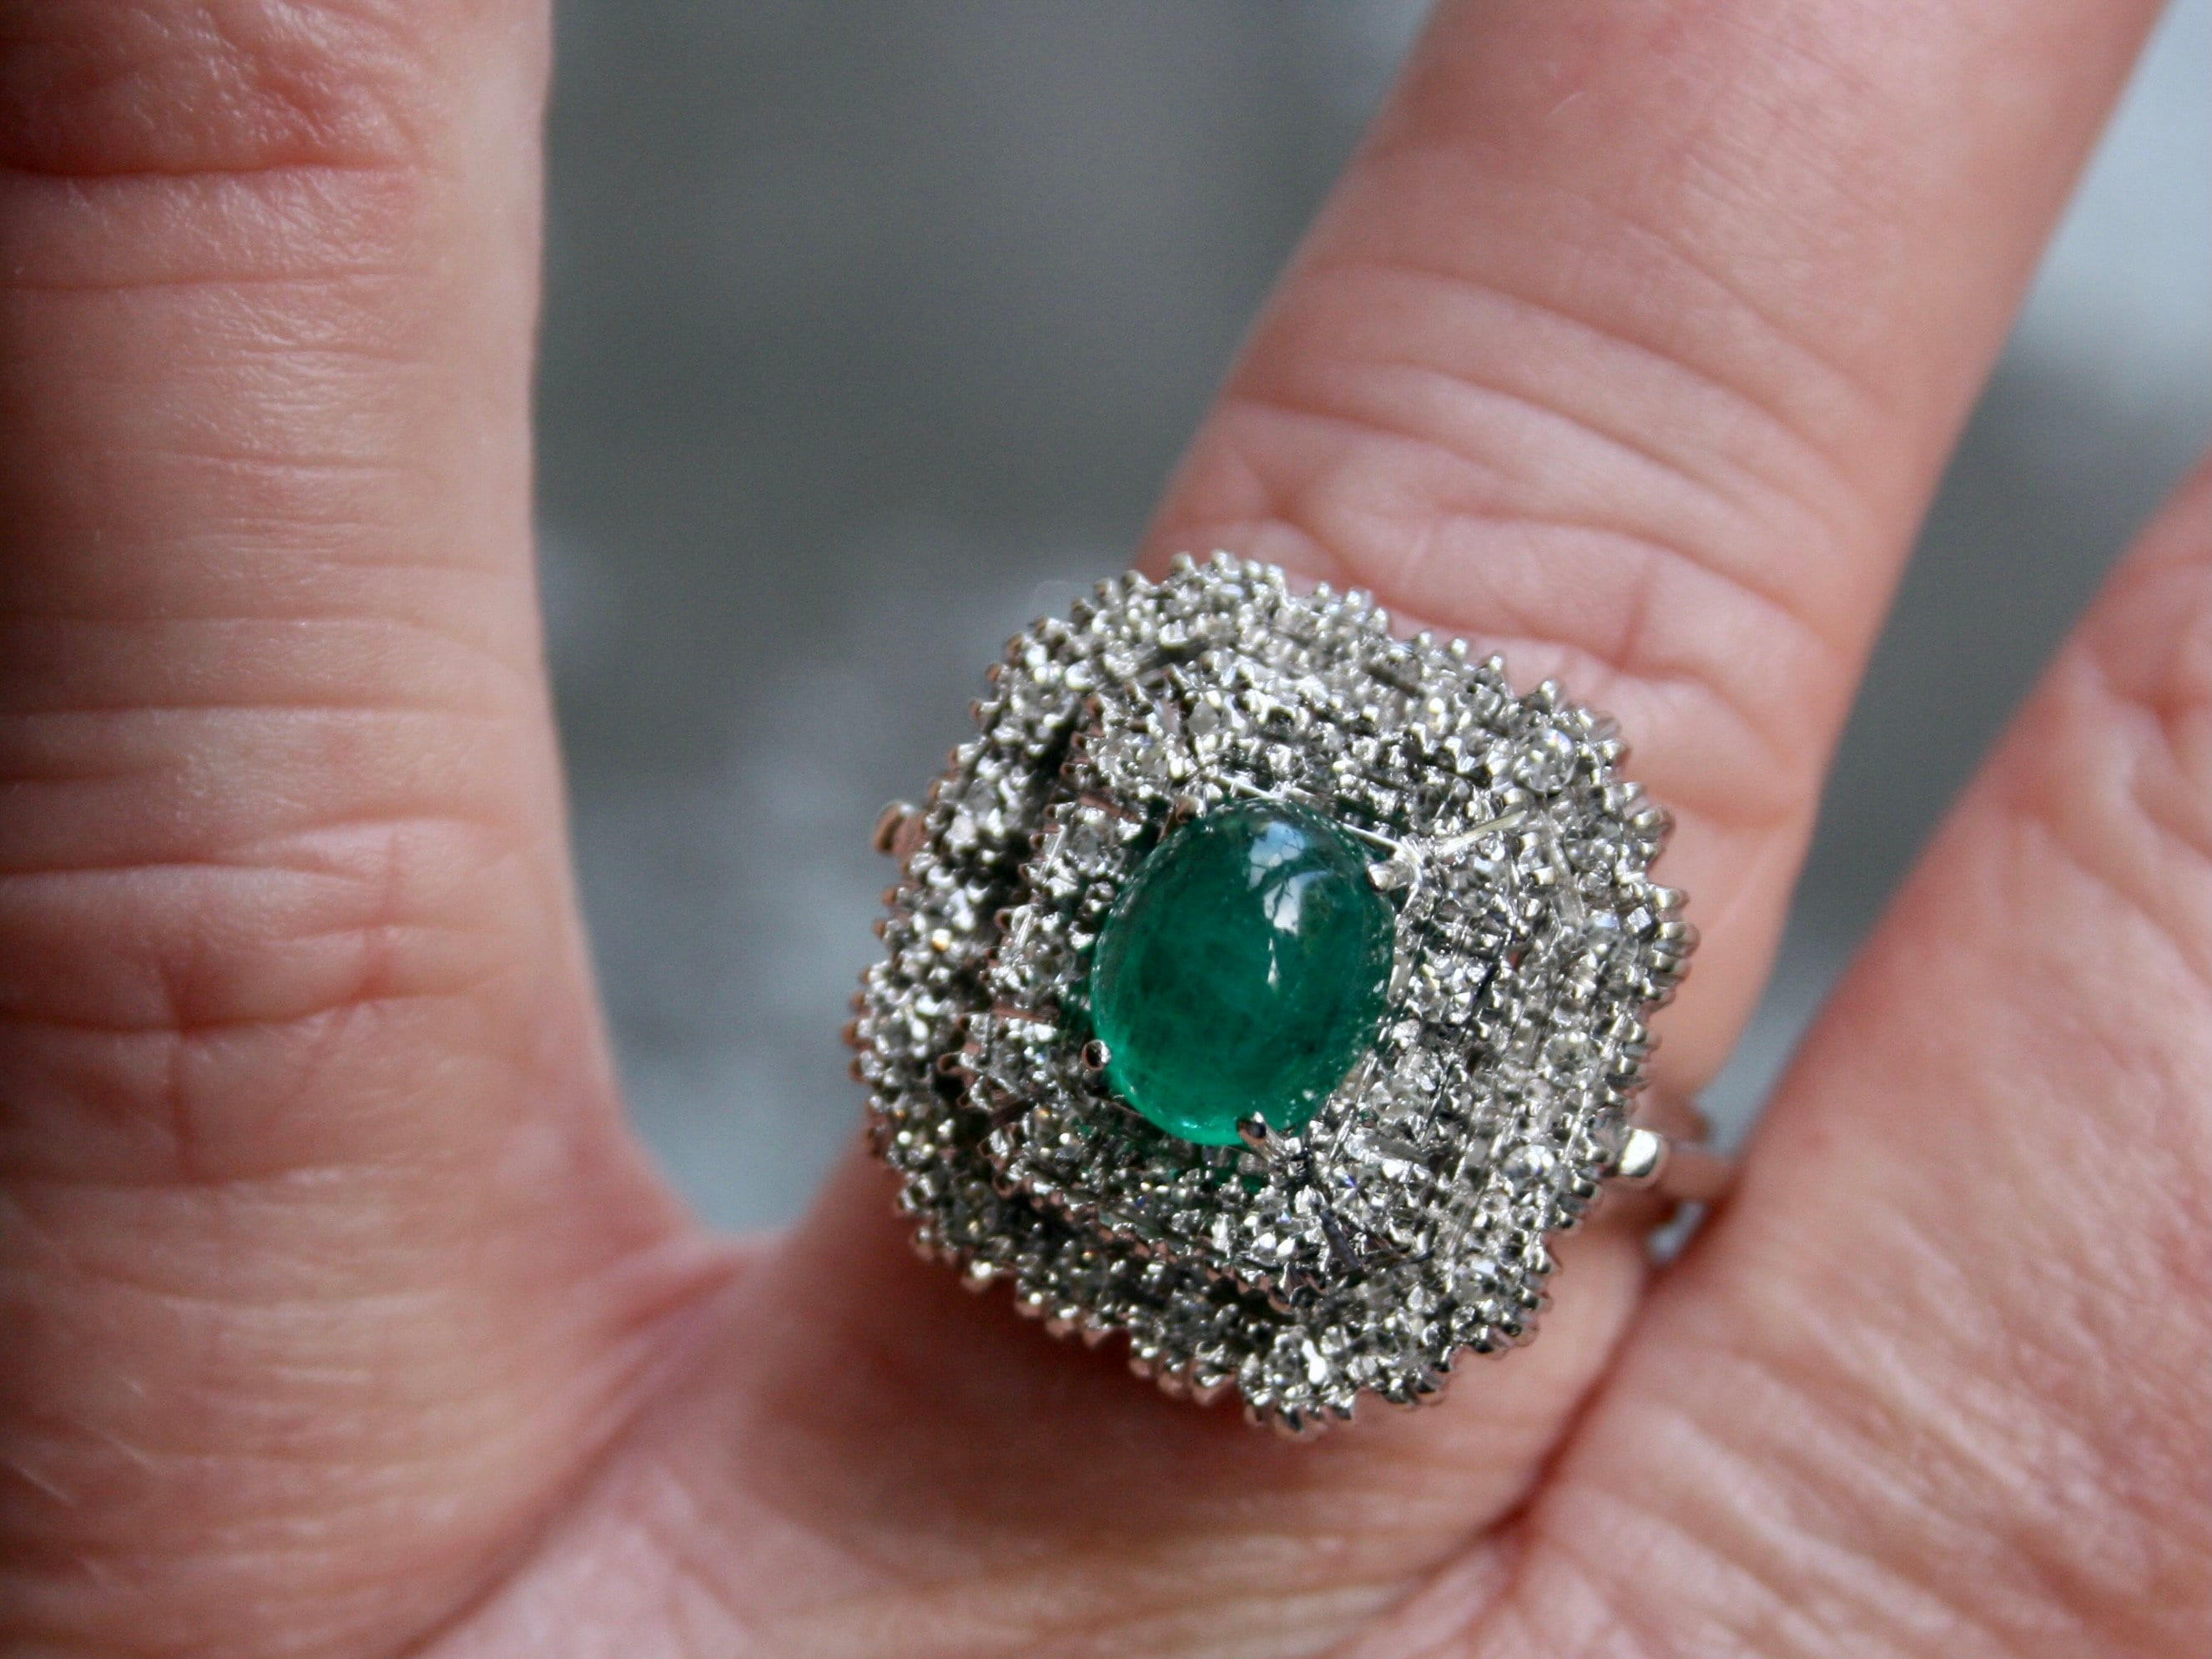 Gorgeous Vintage 18K White Gold Cabochon Emerald and Diamond Double Halo Ring Engagement Ring - 2.18ct.